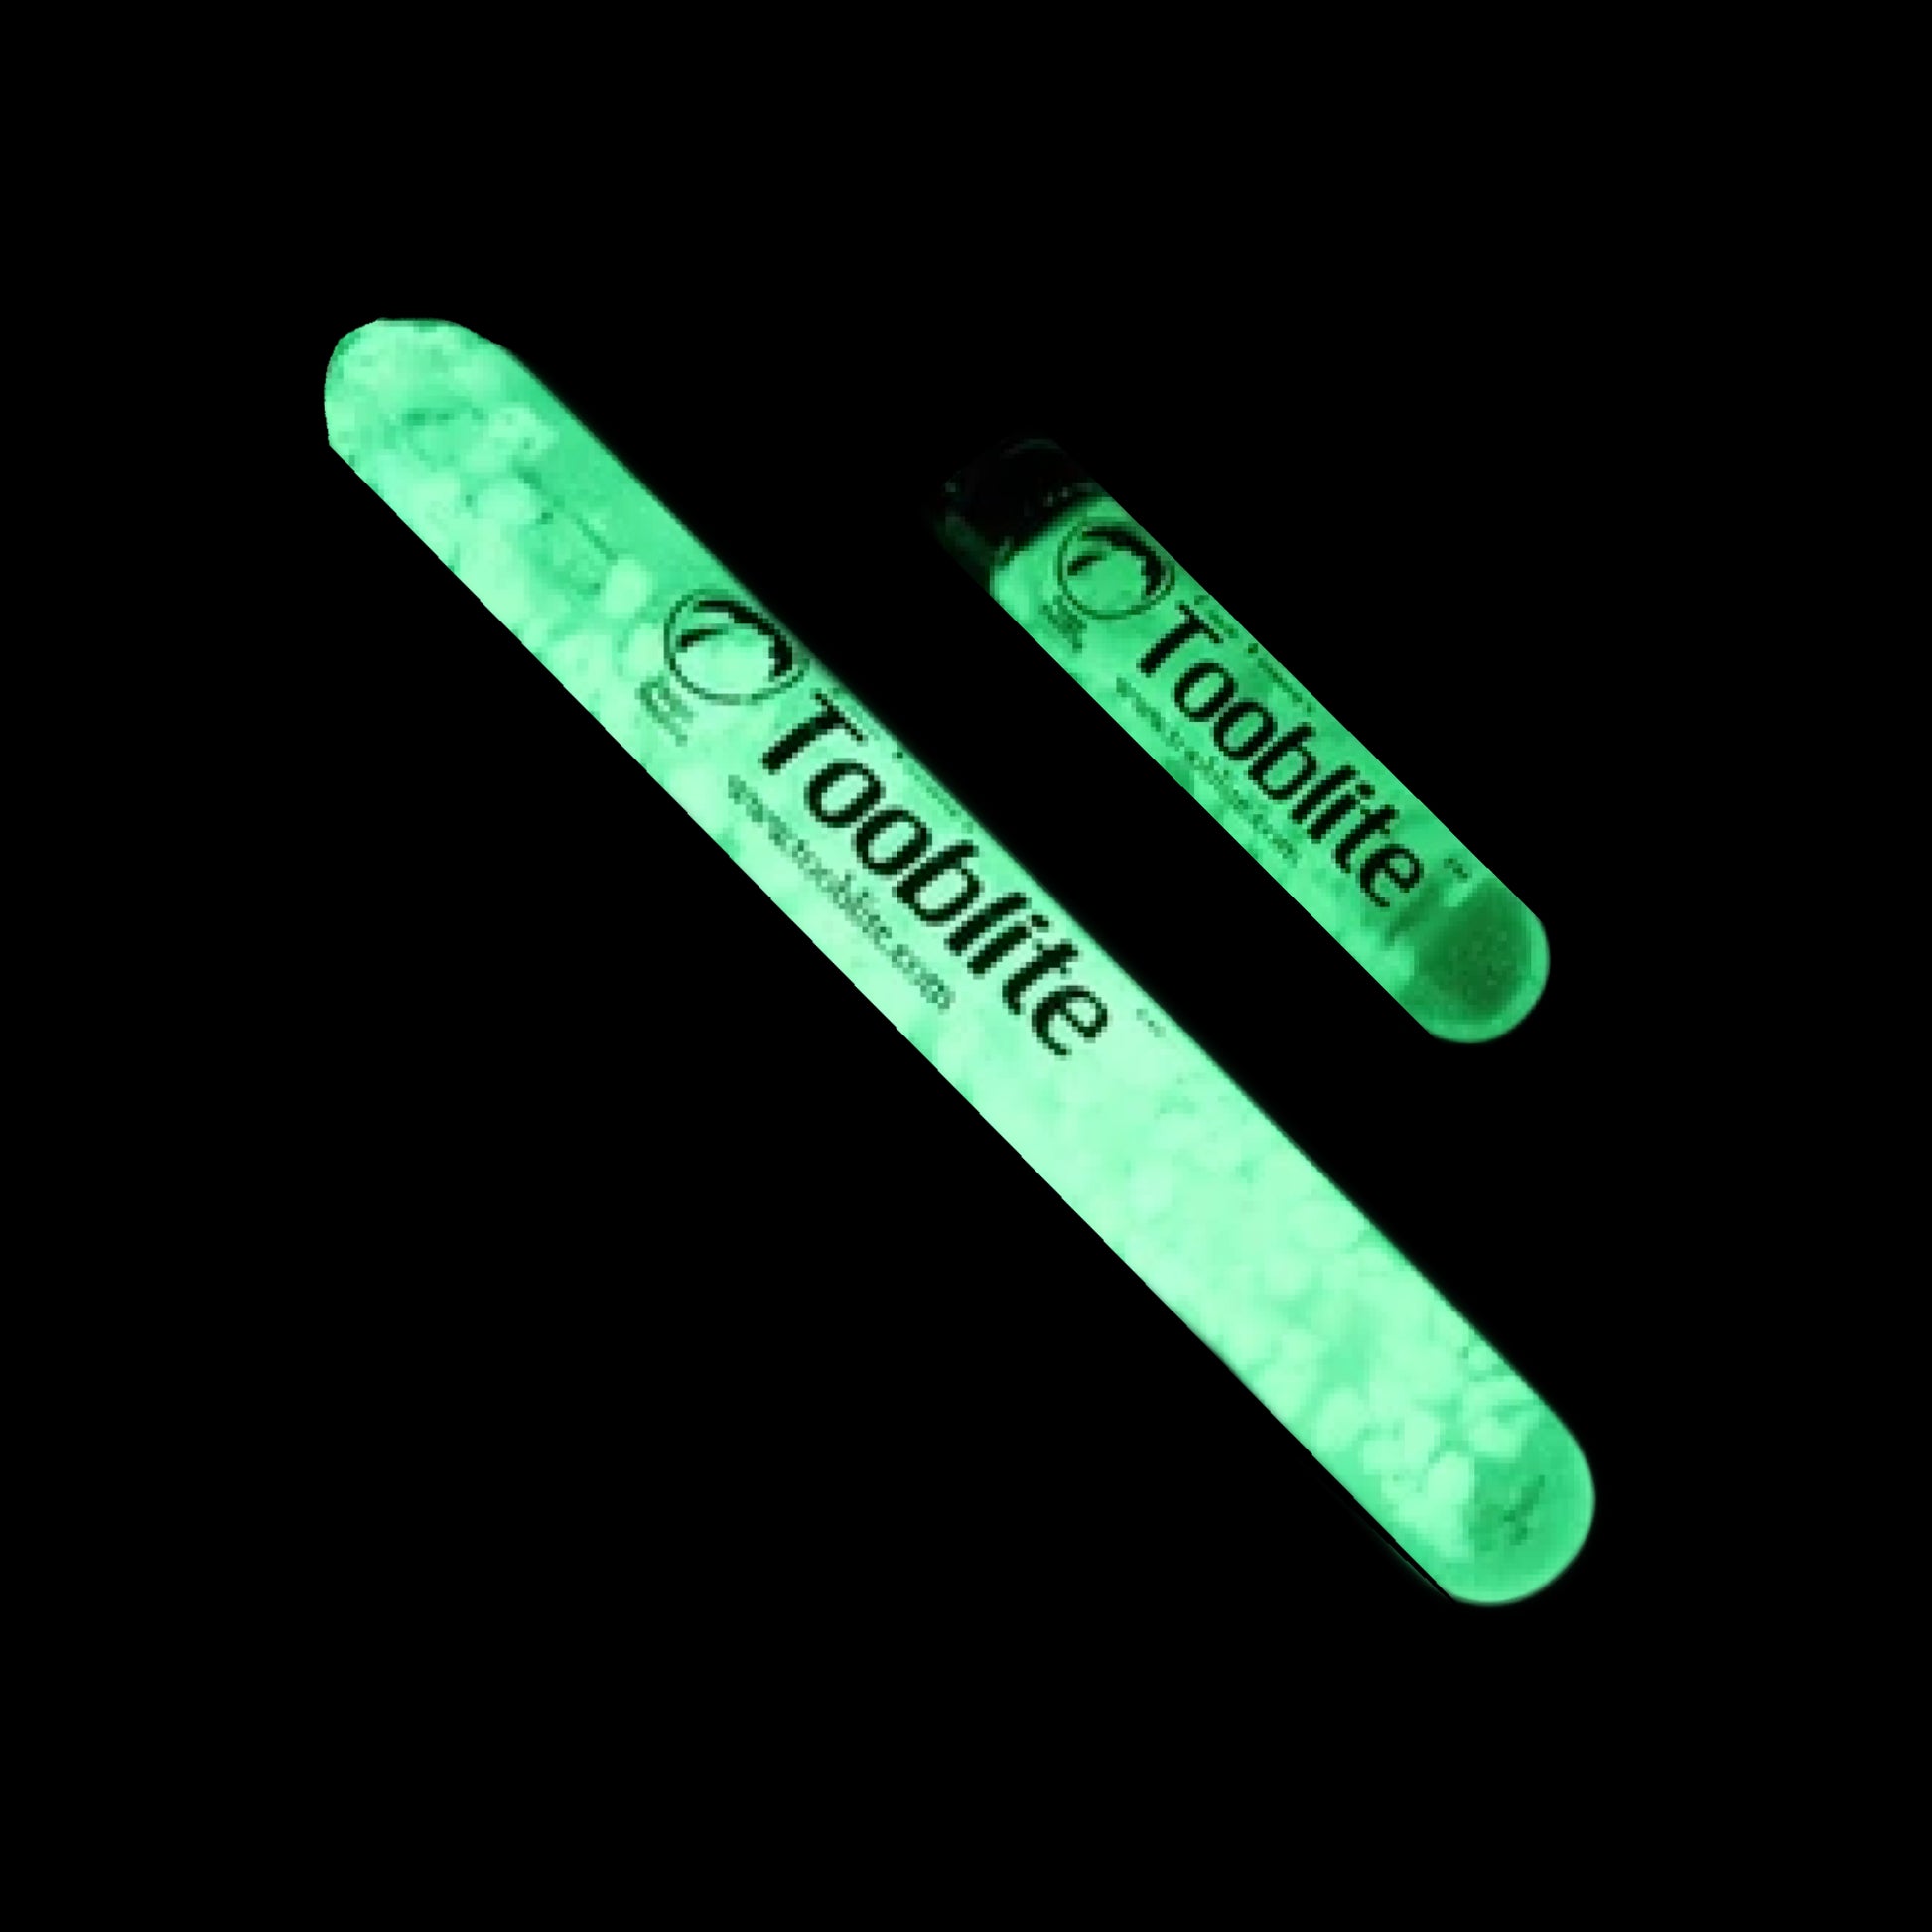 GLOROPE Glow in the Dark 3-6 Tooblite Rechargeable Glo Sticks